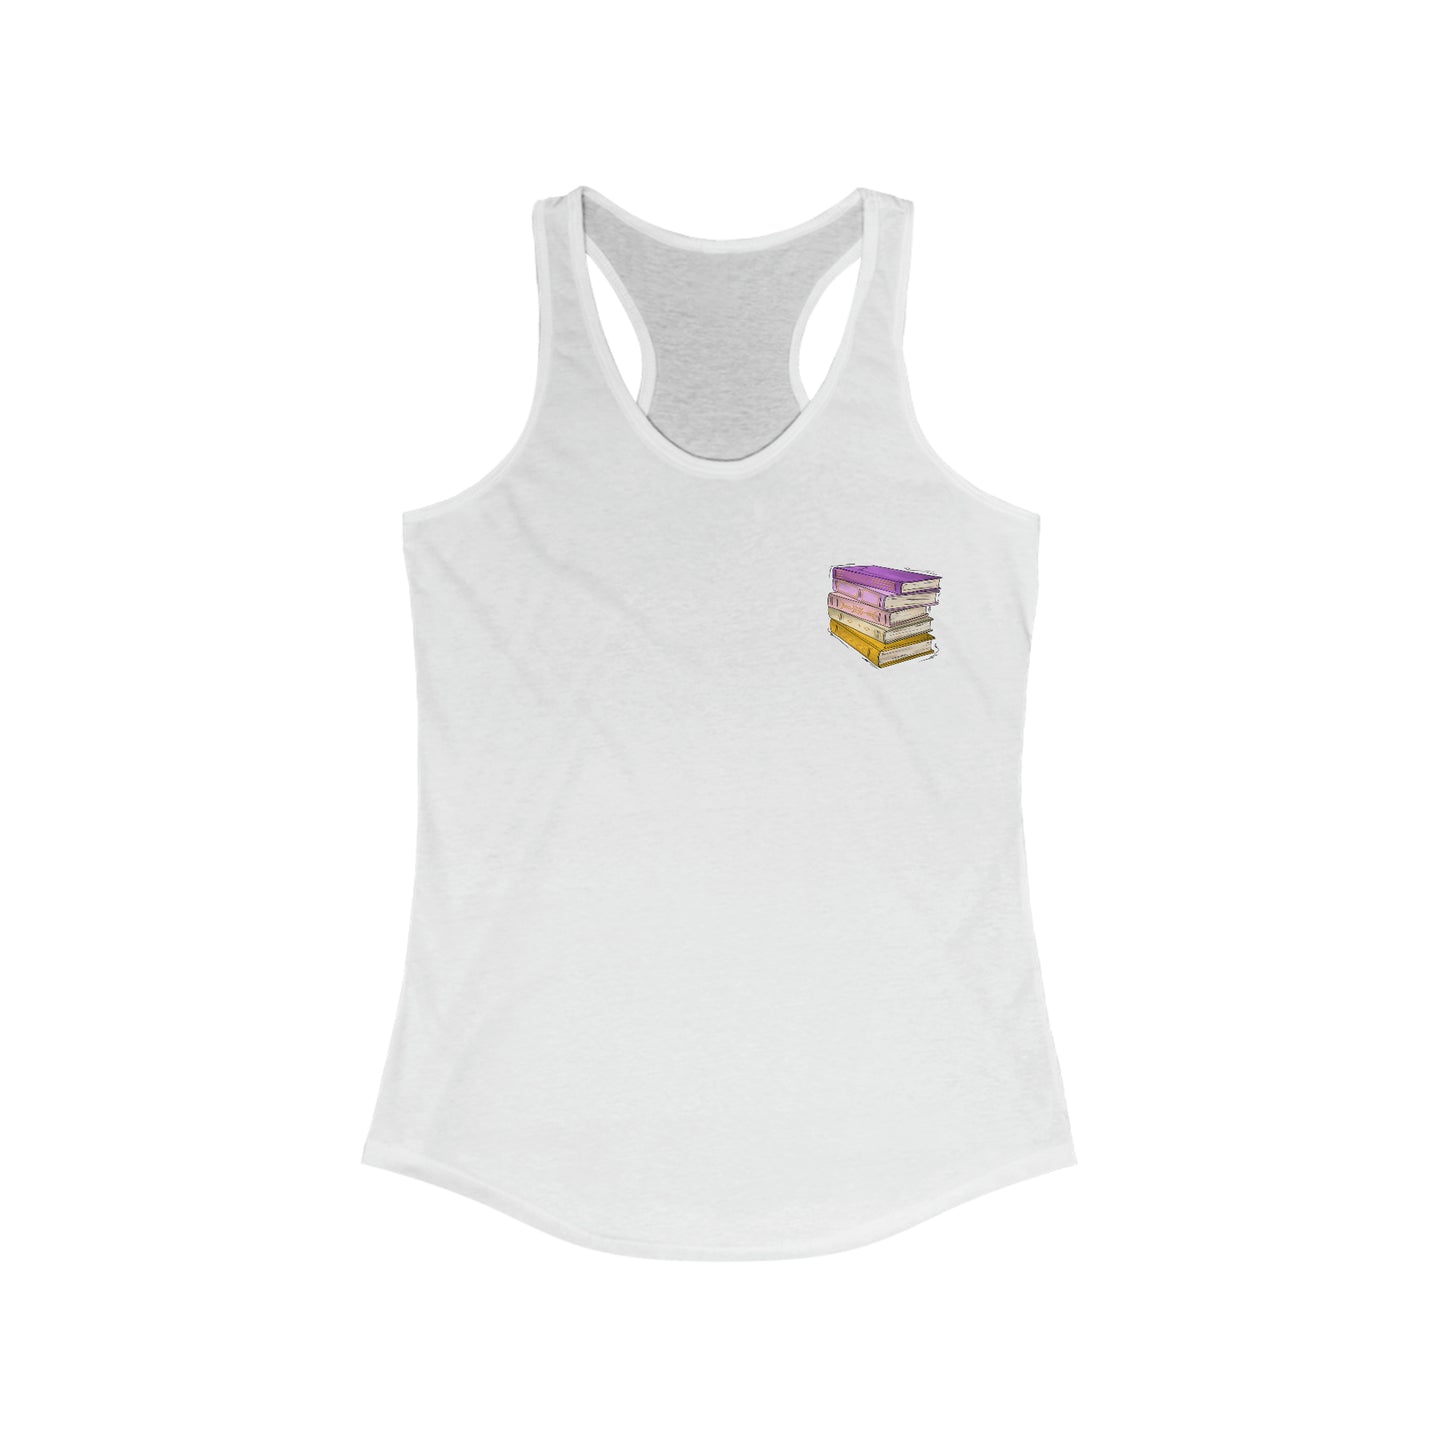 Trixic Pride Flag Old Books - Womens Tank Top